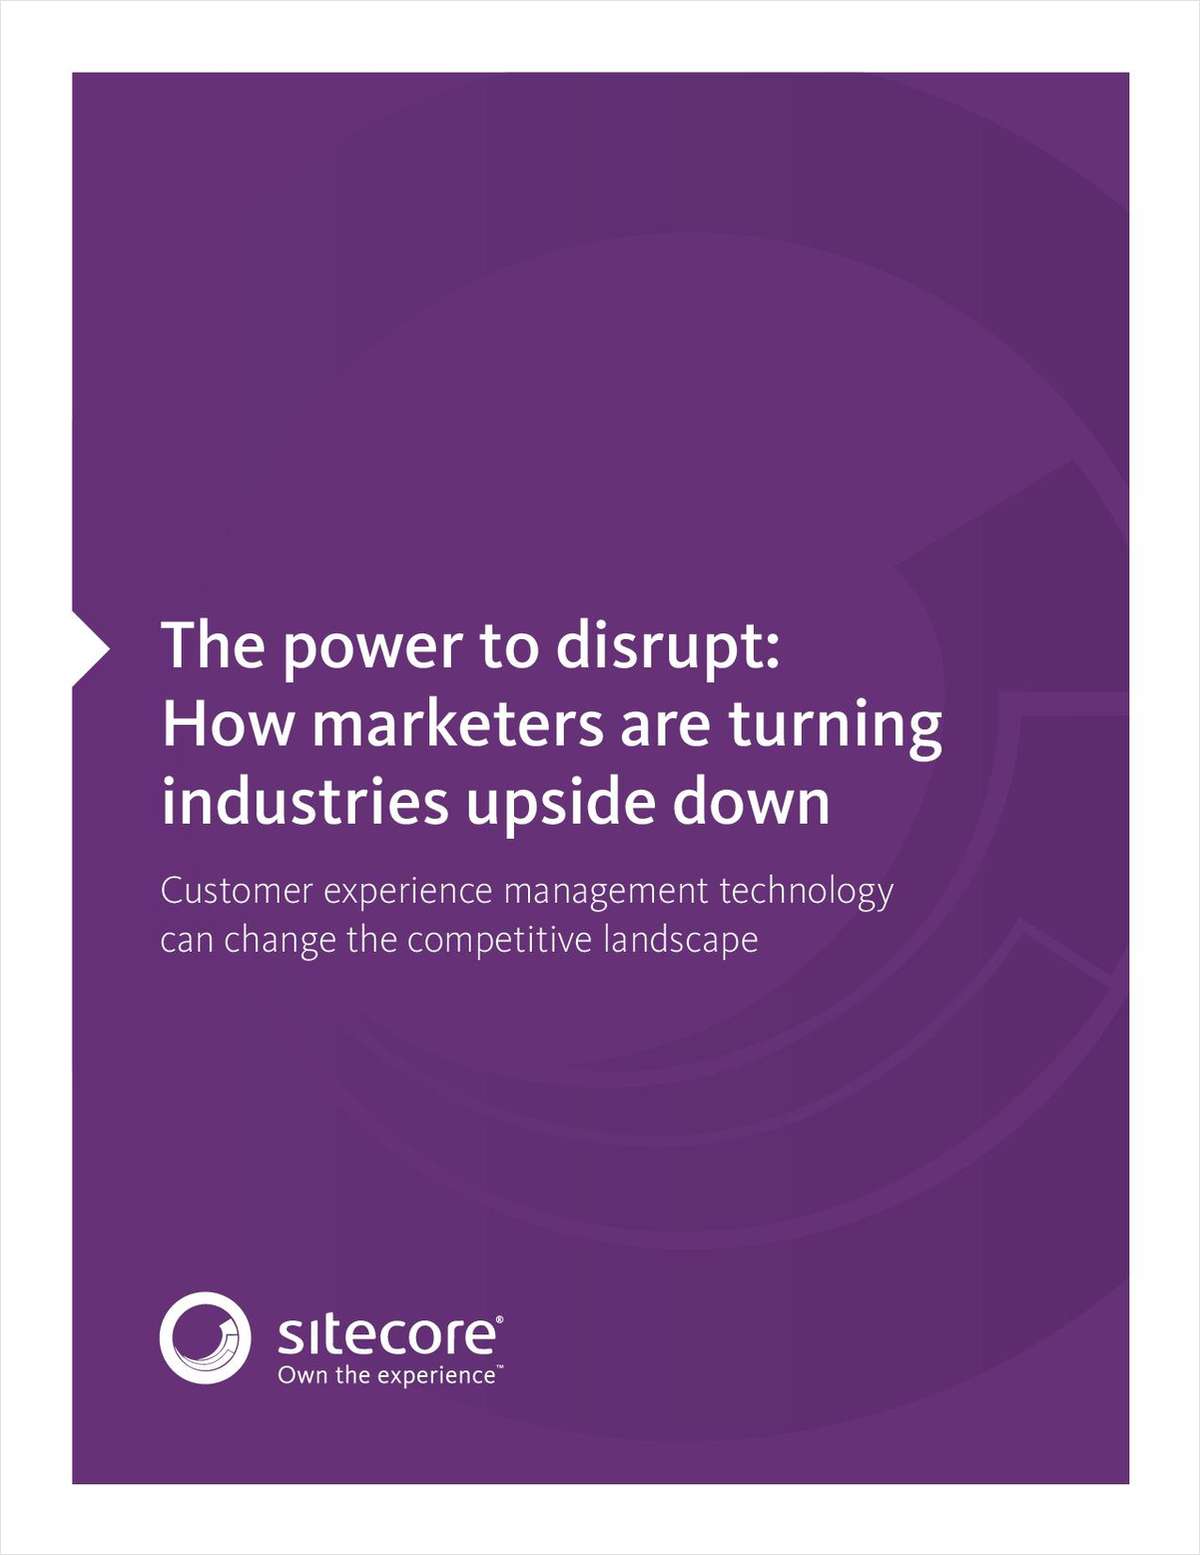 The Power to Disrupt: How Marketers are Turning Industries Upside Down